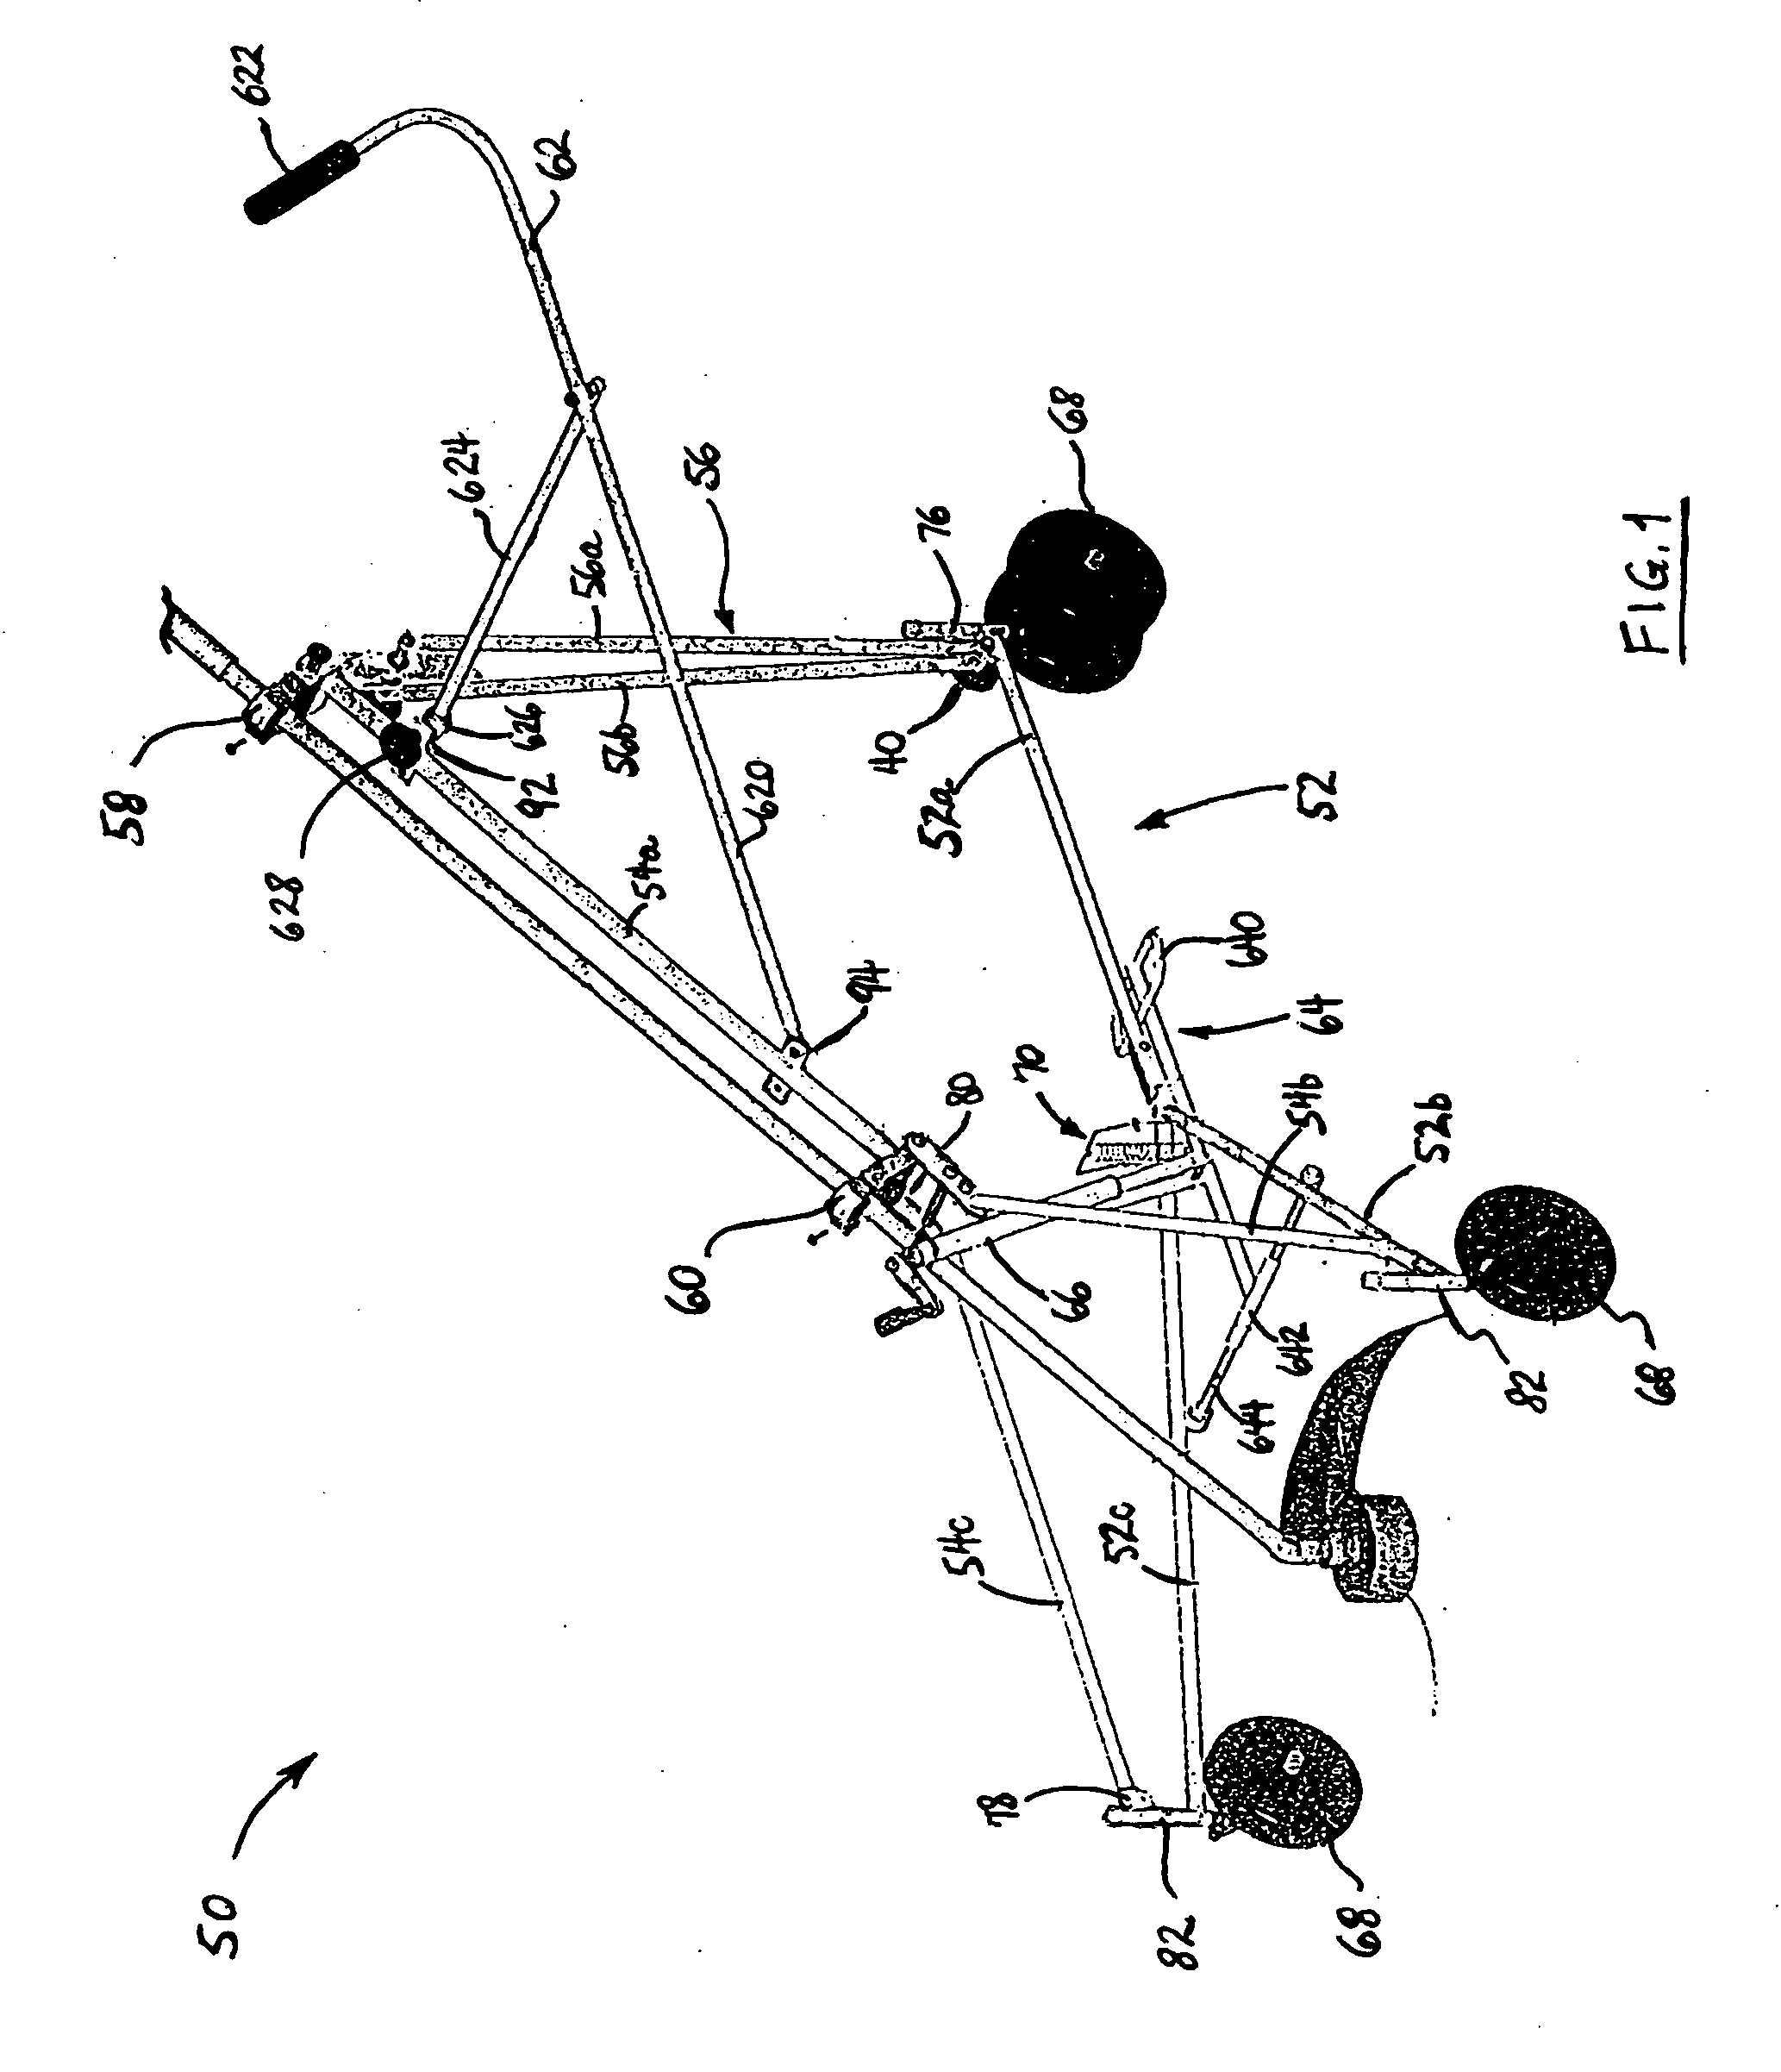 Mobile carriage supporting a tool or implement